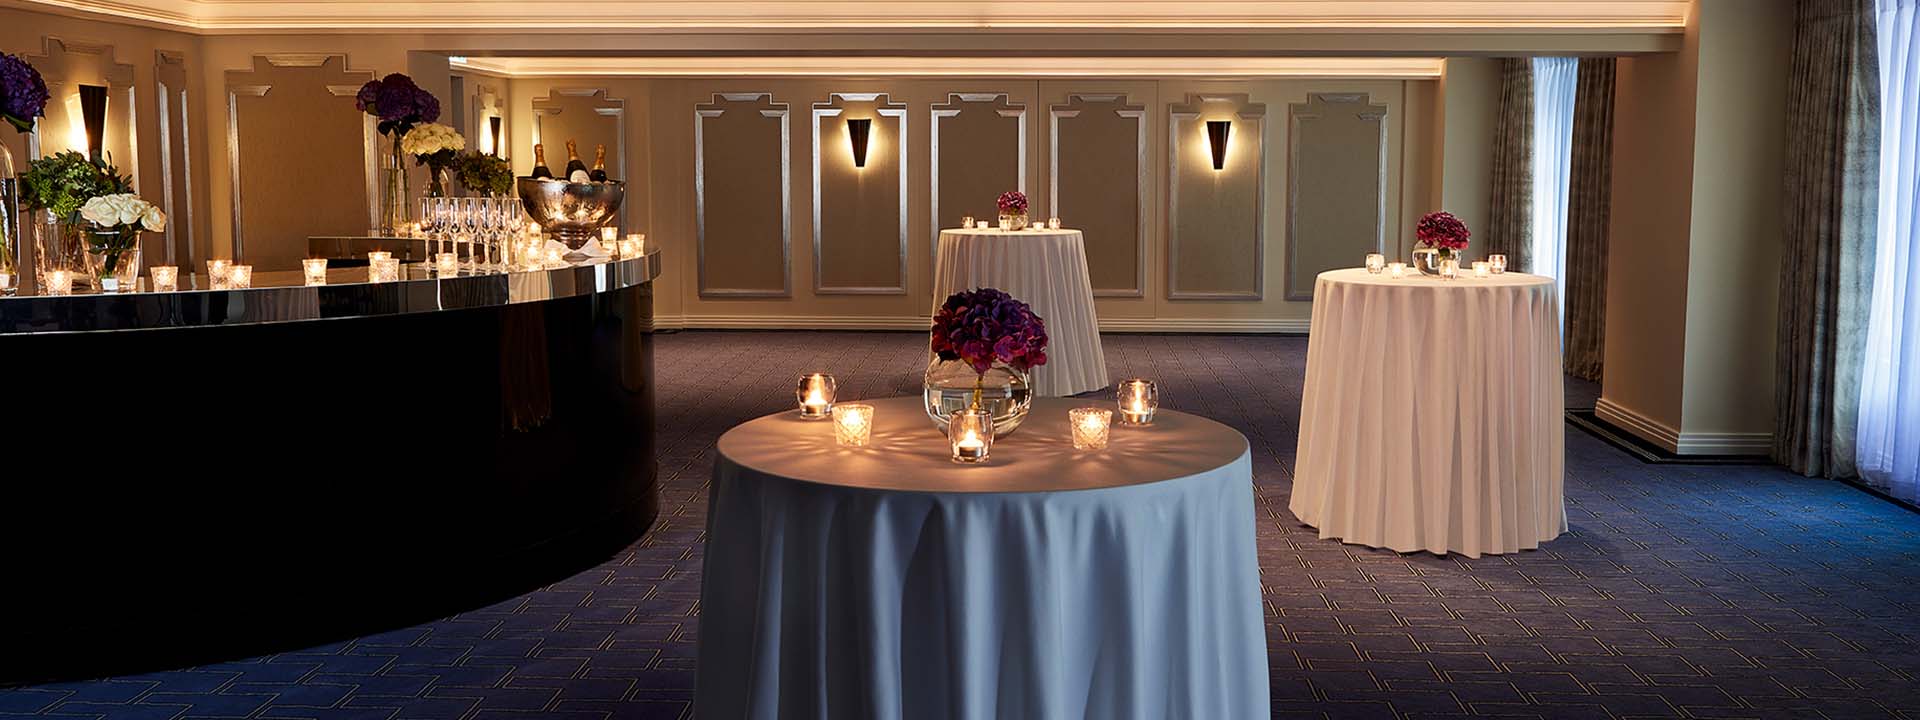 A view of part of the Clarence Room, in Art Deco design, includes a bar and tables enriched with flowers.